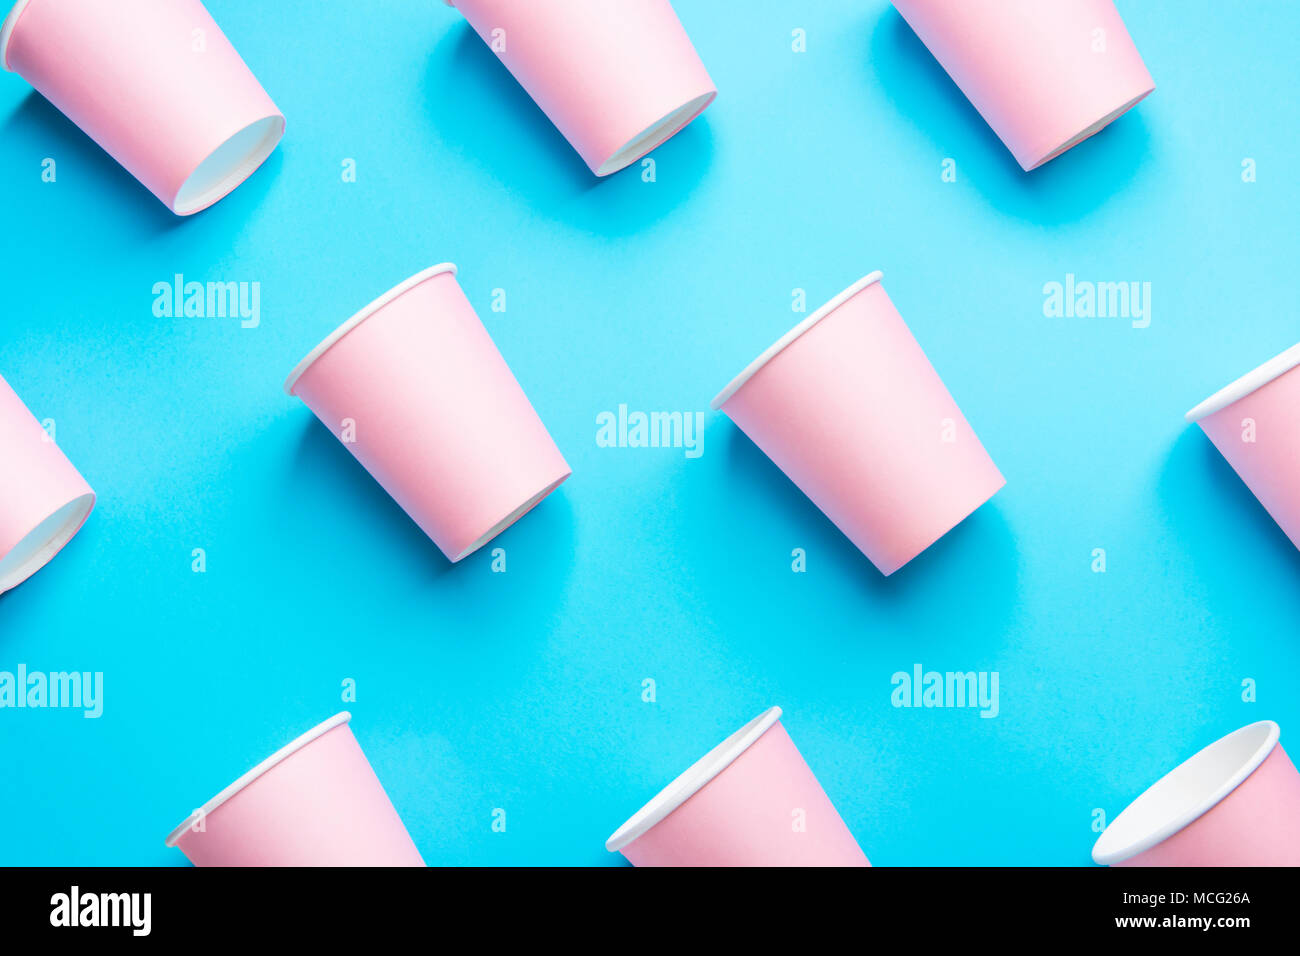 Pattern from Pink Paper Drinking Cups Arranged Diagonally on Mint Blue Backgrounds. Birthday Party Celebration Abstract Fashion Baby Shower Concept. P Stock Photo